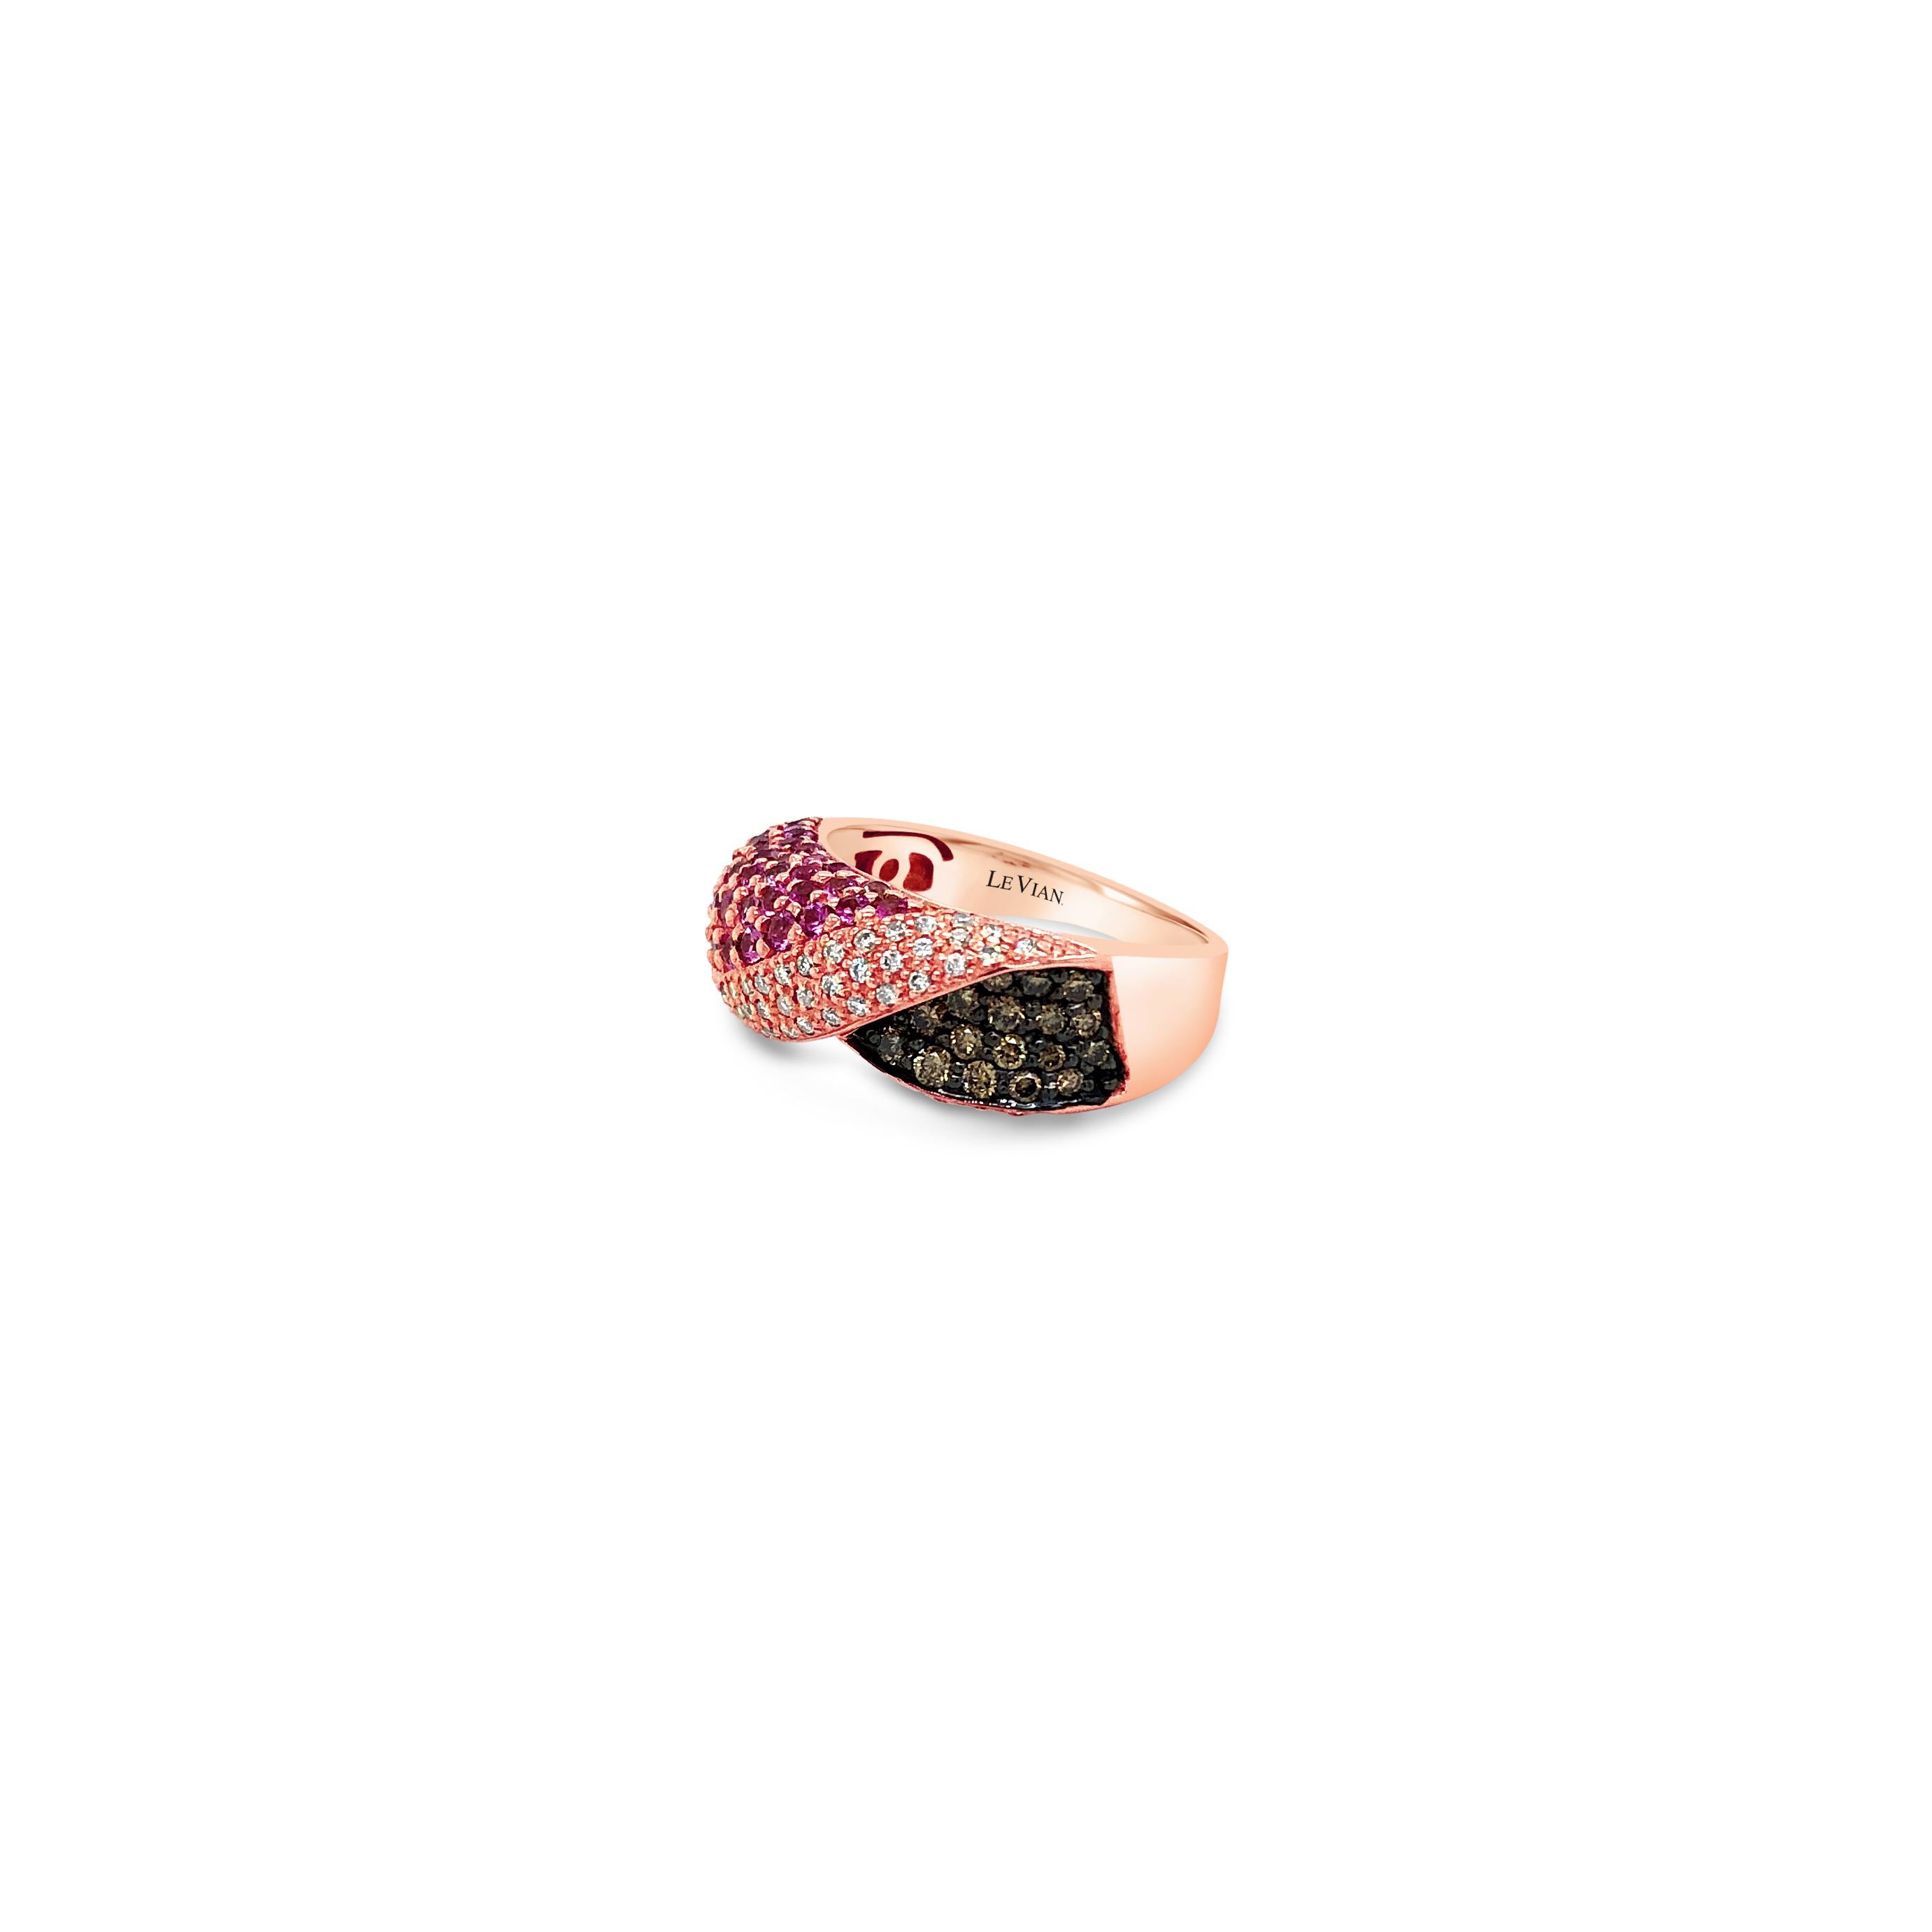 Grand Sample Sale Ring featuring 7/8 cts. Bubble Gum Pink Sapphire™, 1/3 cts. Chocolate Diamonds® , 1/4 cts. Vanilla Diamonds®  set in 14K Strawberry Gold®
